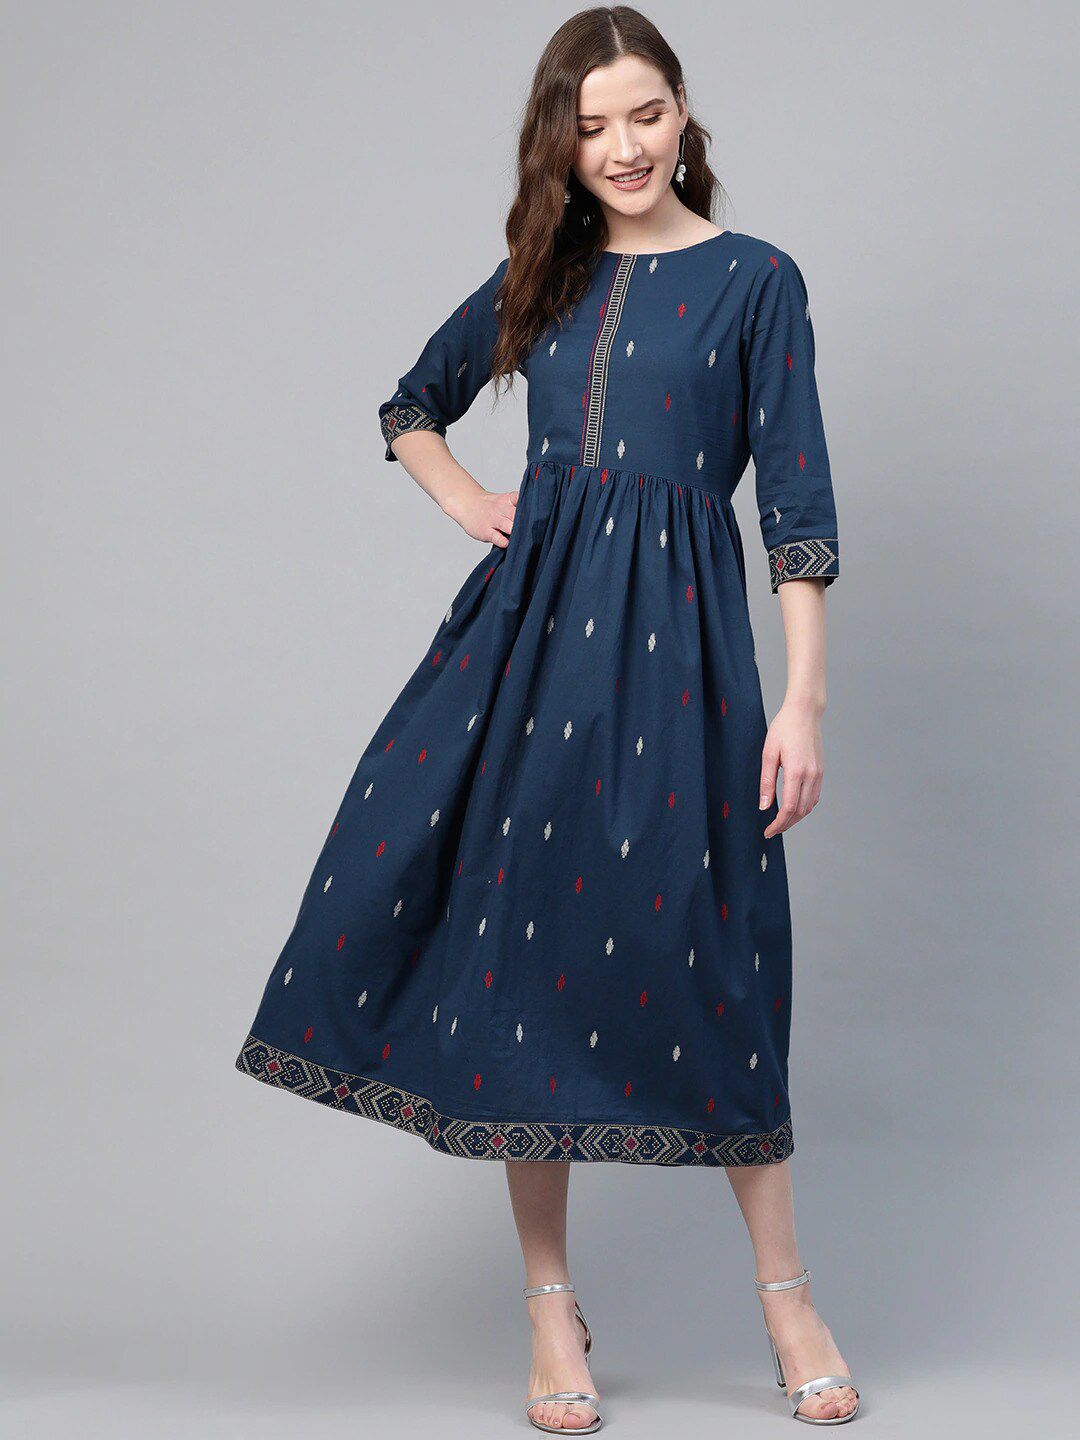 Yuris Navy Blue & Off-White Geometric Printed Cotton Fit and Flare Dress Price in India